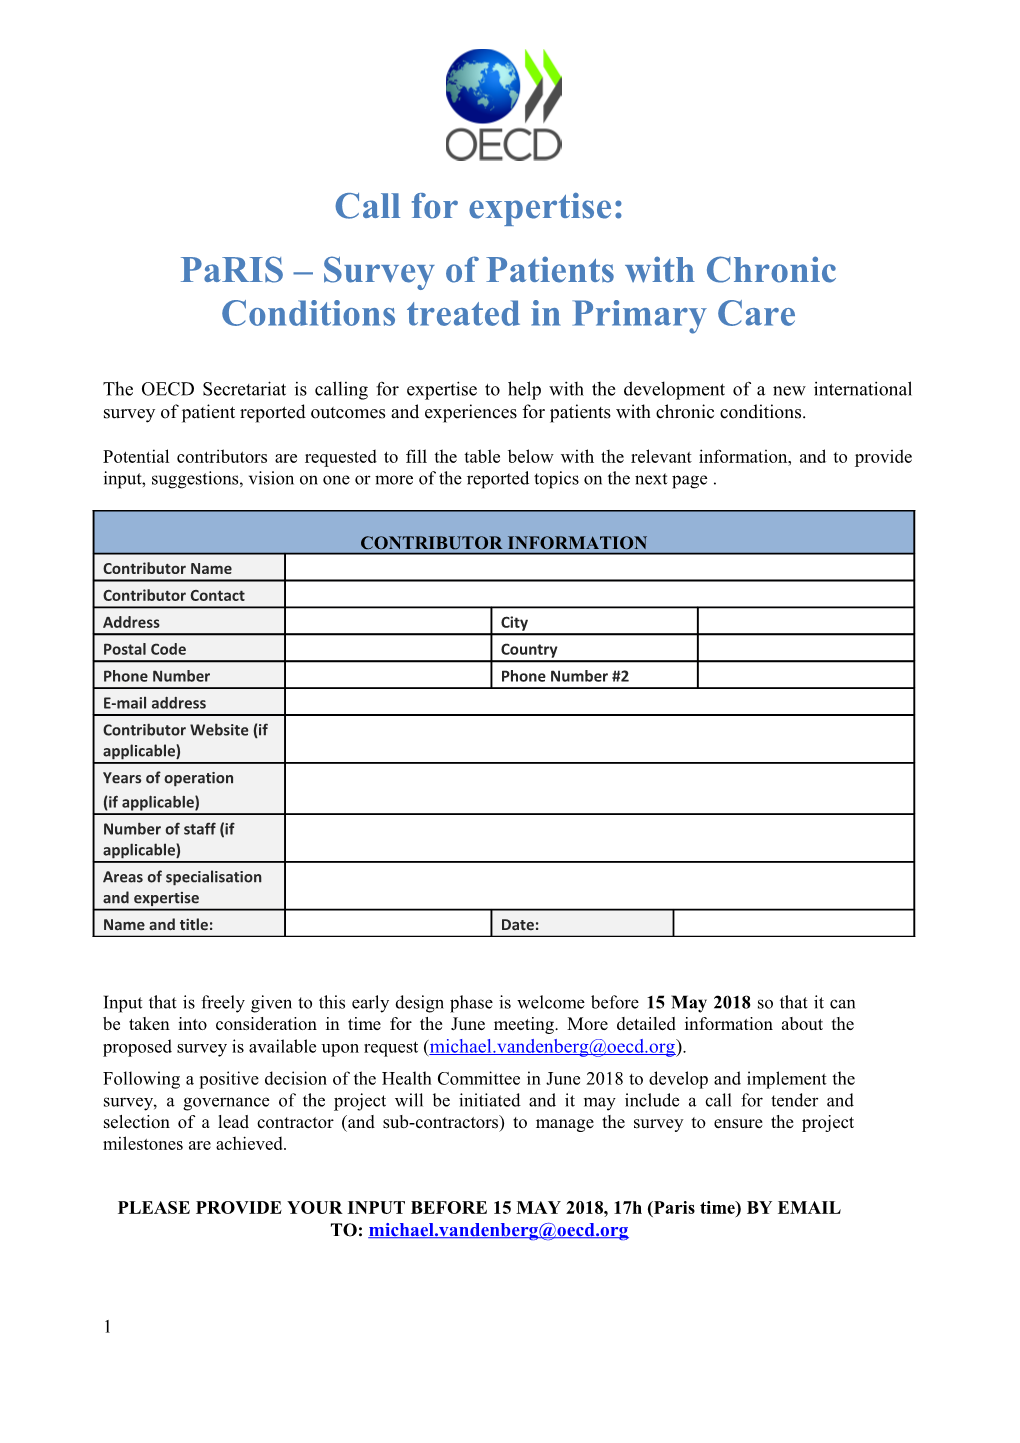 Paris Survey of Patients with Chronic Conditions Treated in Primary Care